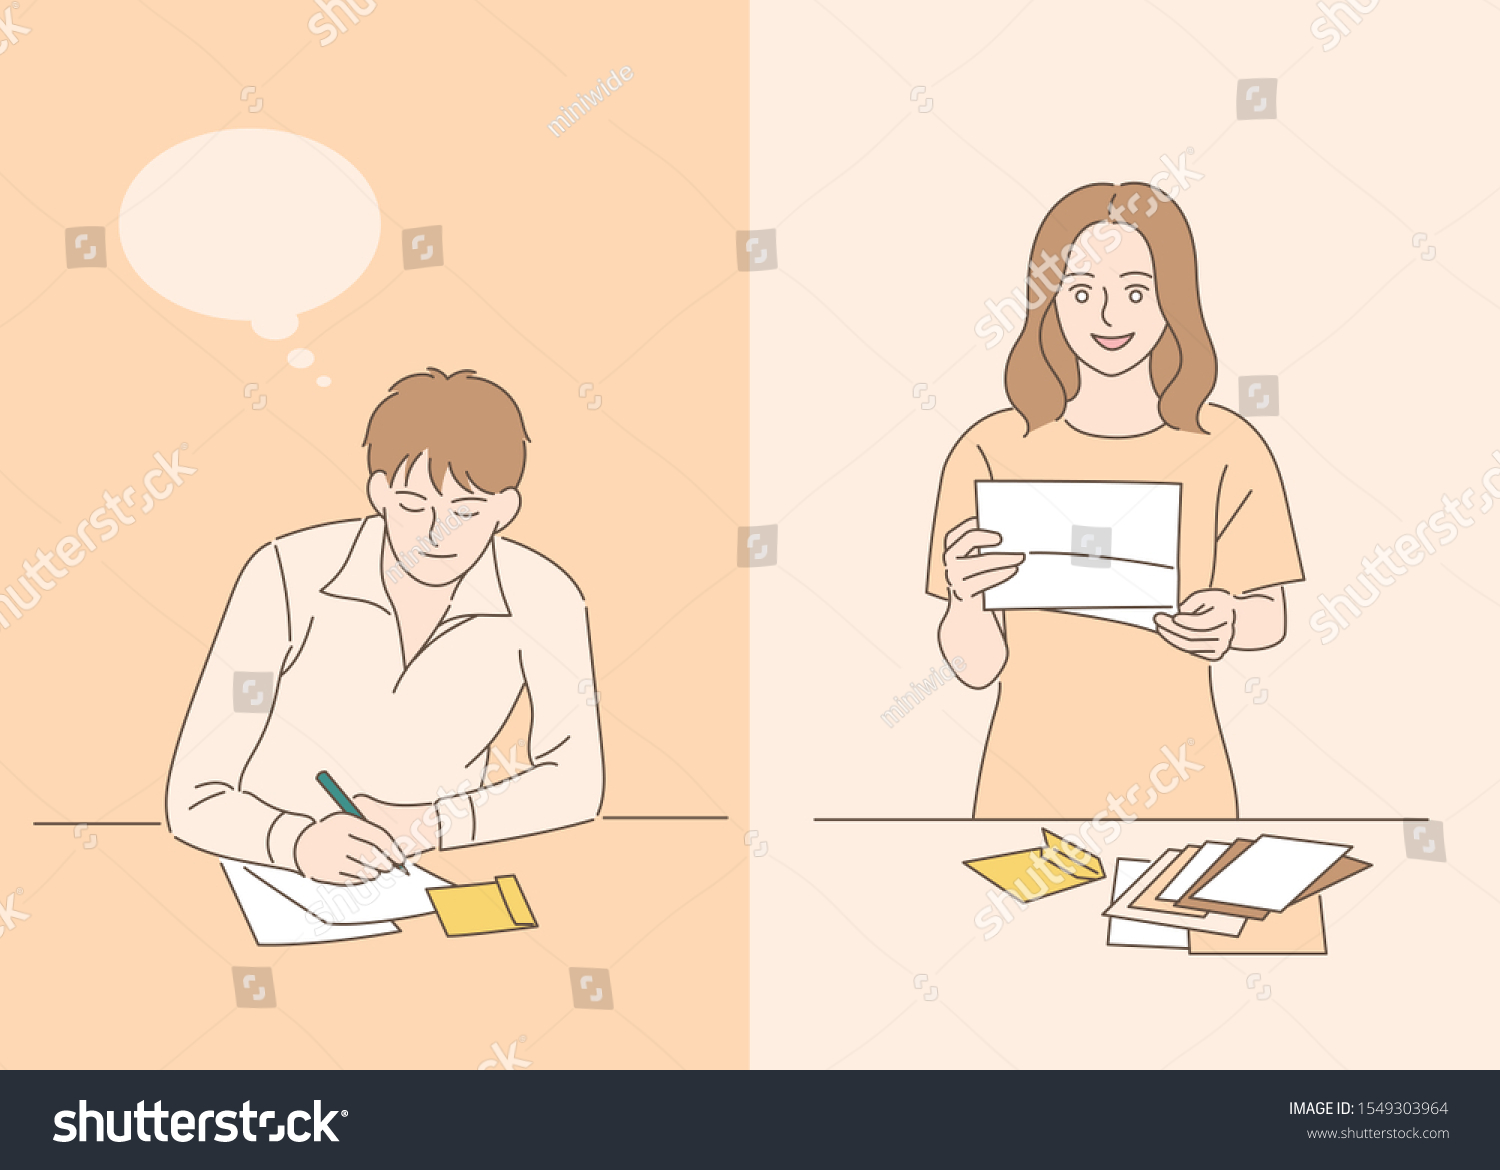 Letter To A Girlfriend from image.shutterstock.com